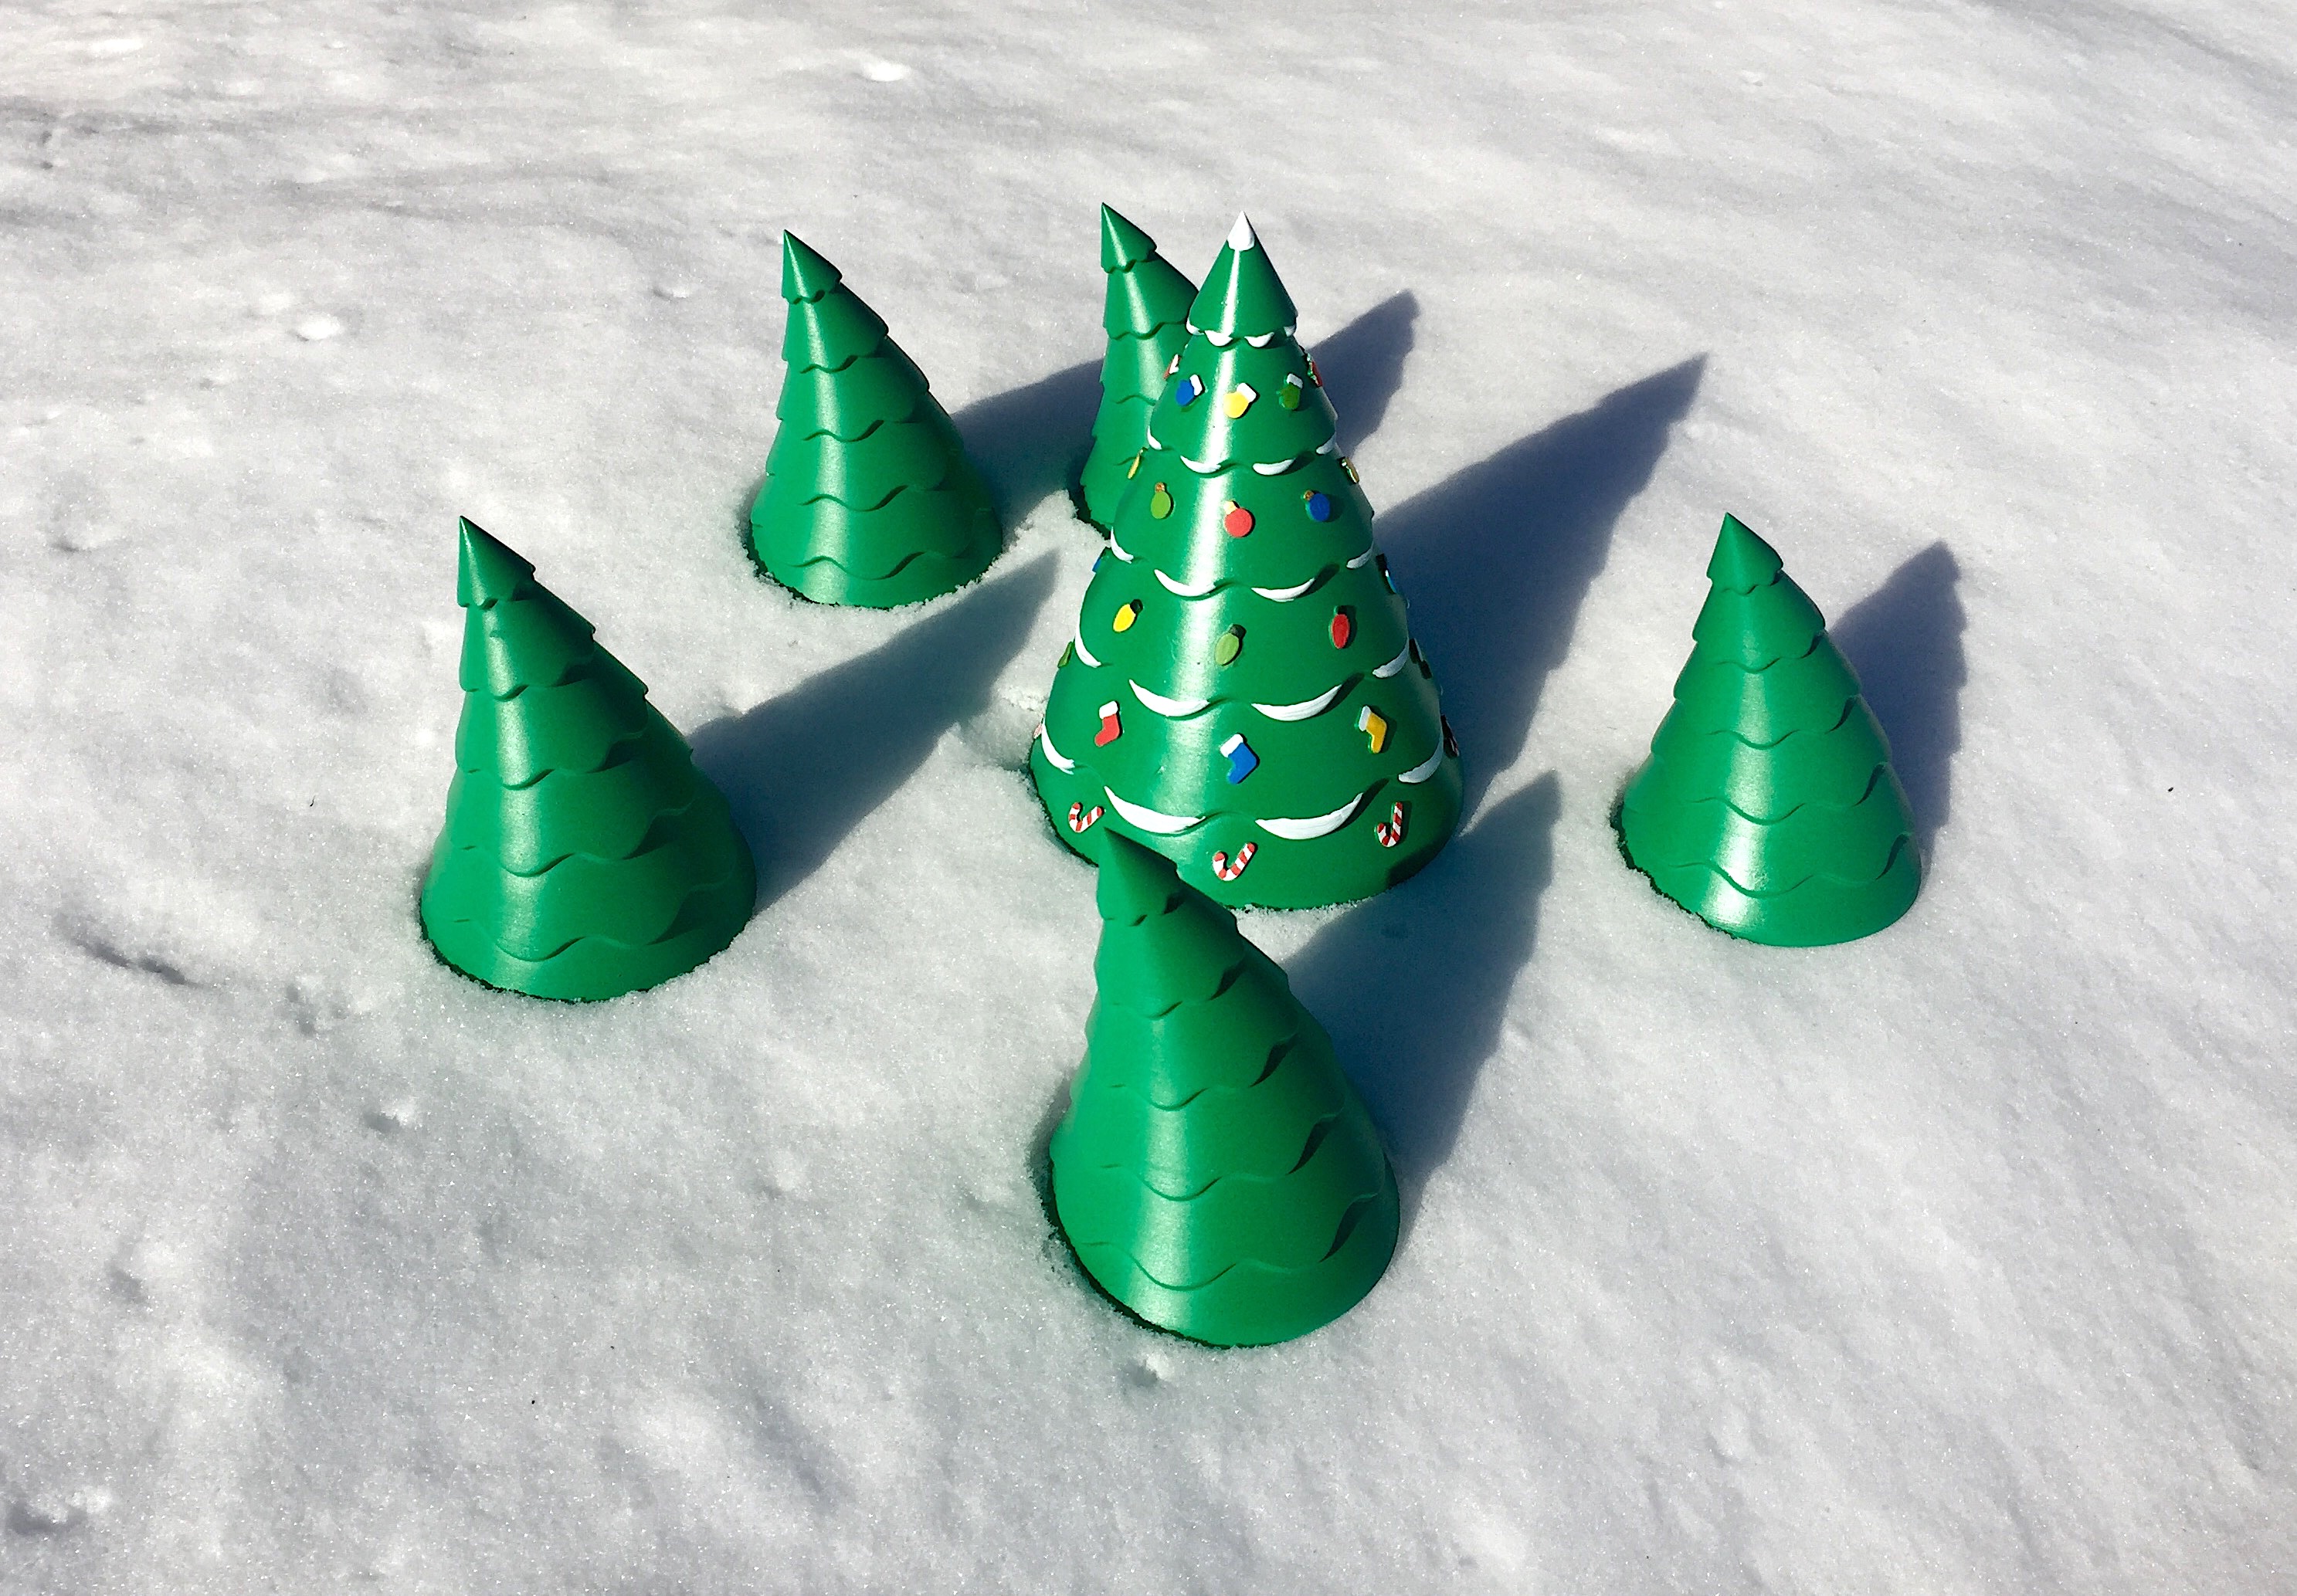 Rapid Protoyping: Realize 3D Printed Holiday Trees